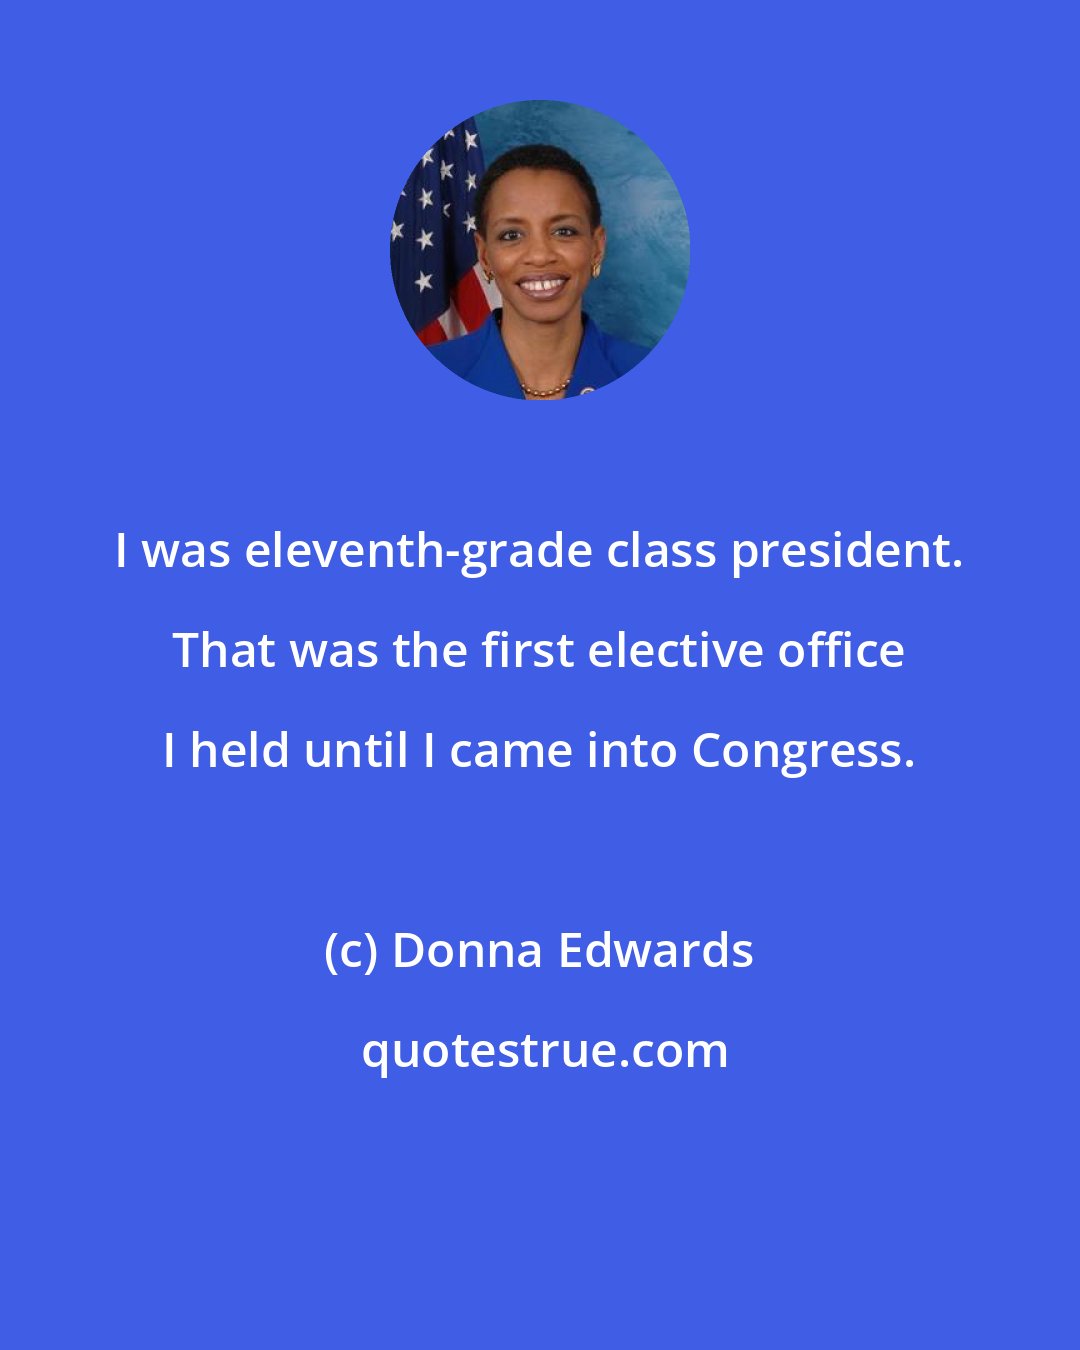 Donna Edwards: I was eleventh-grade class president. That was the first elective office I held until I came into Congress.